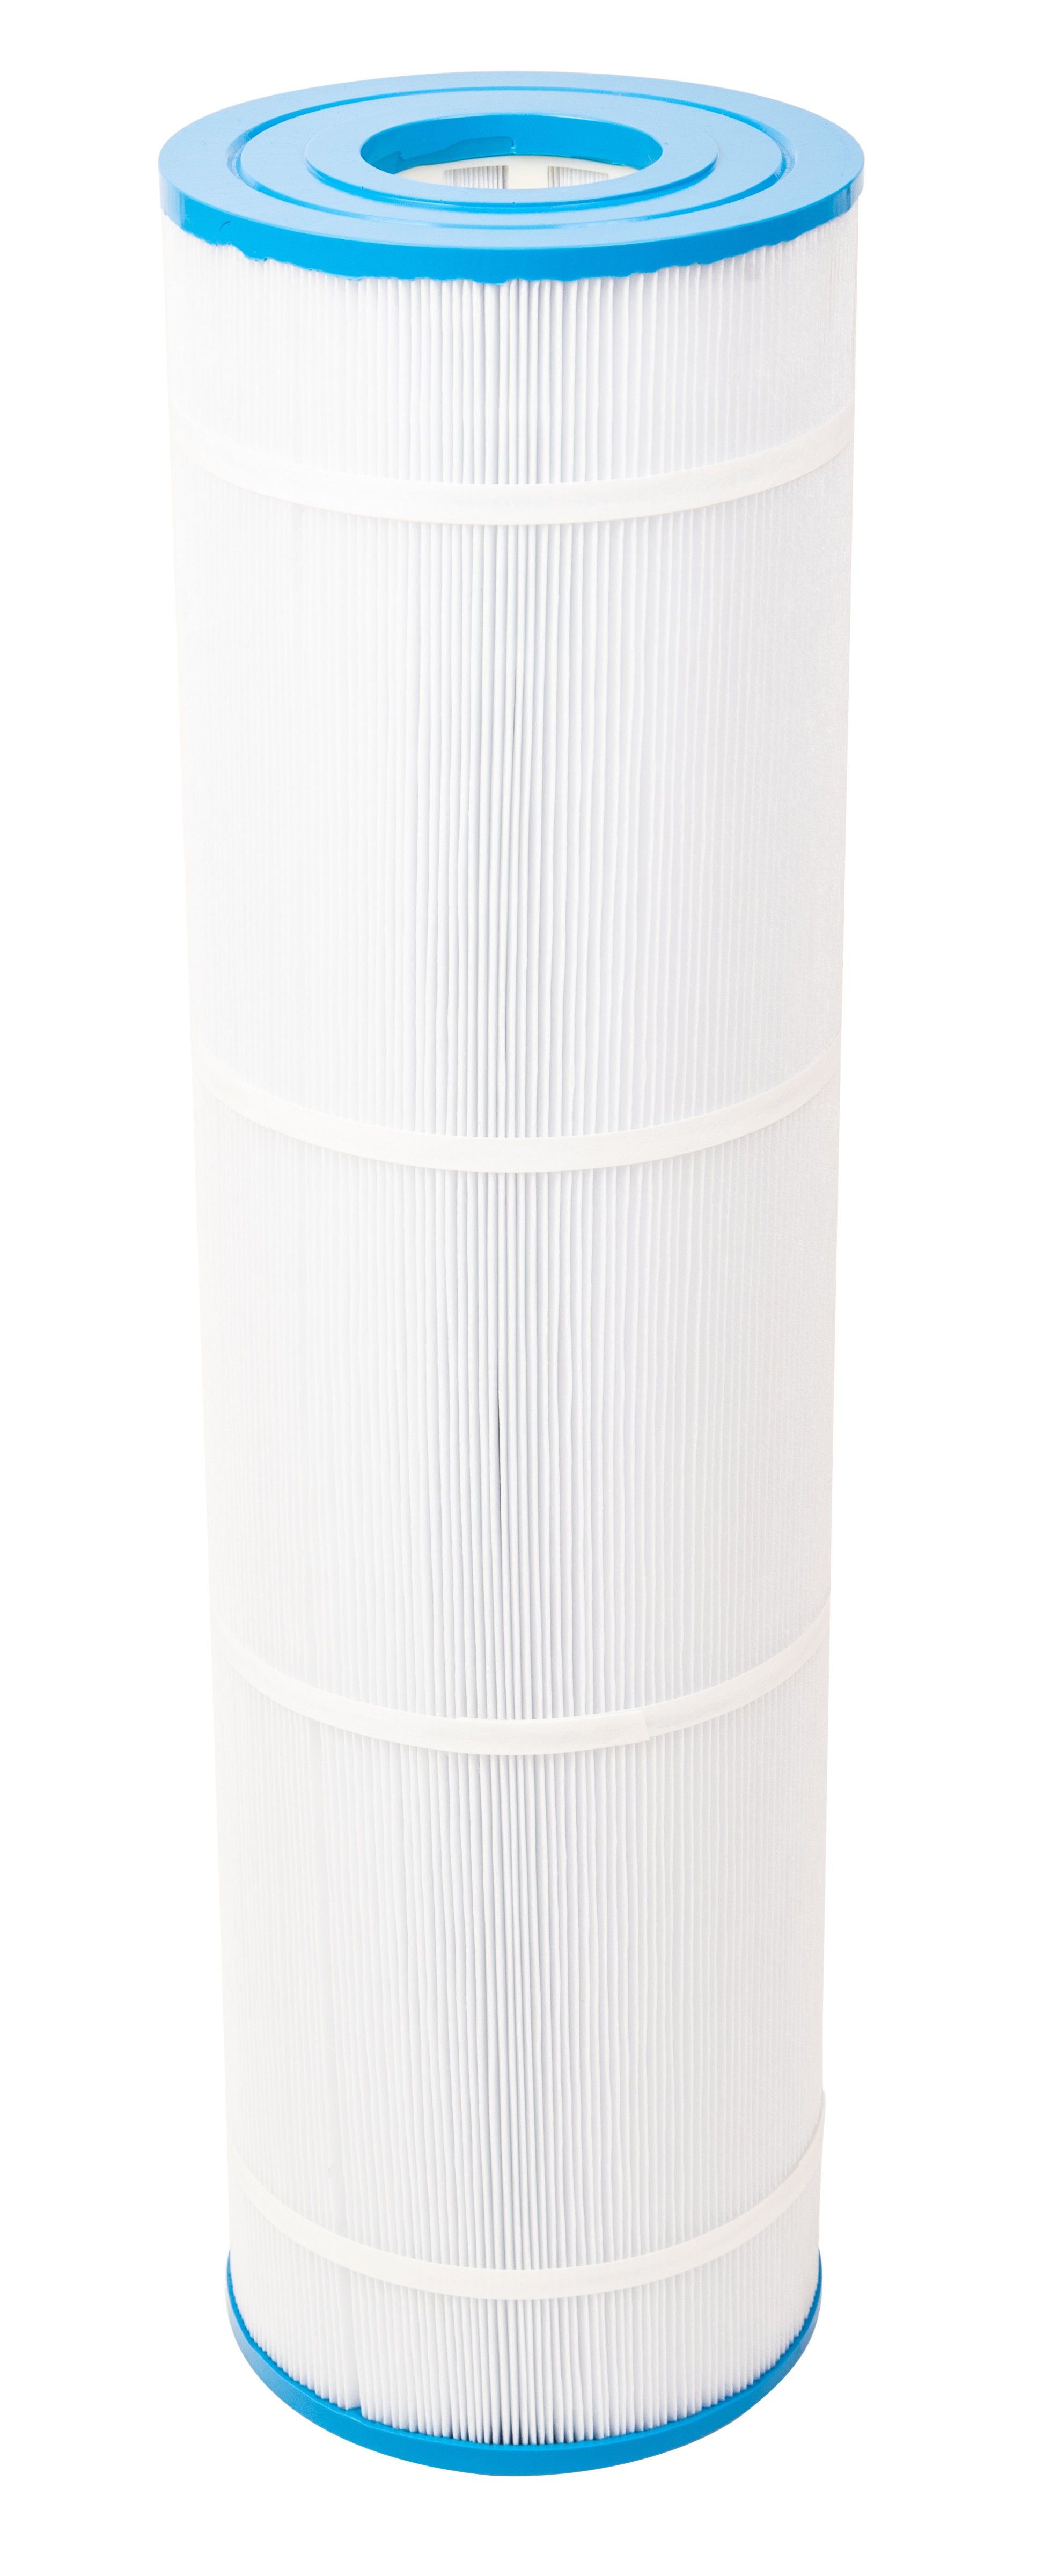 Replacement Cartridge for Cartridge Filter Model 73103002 - 150SF